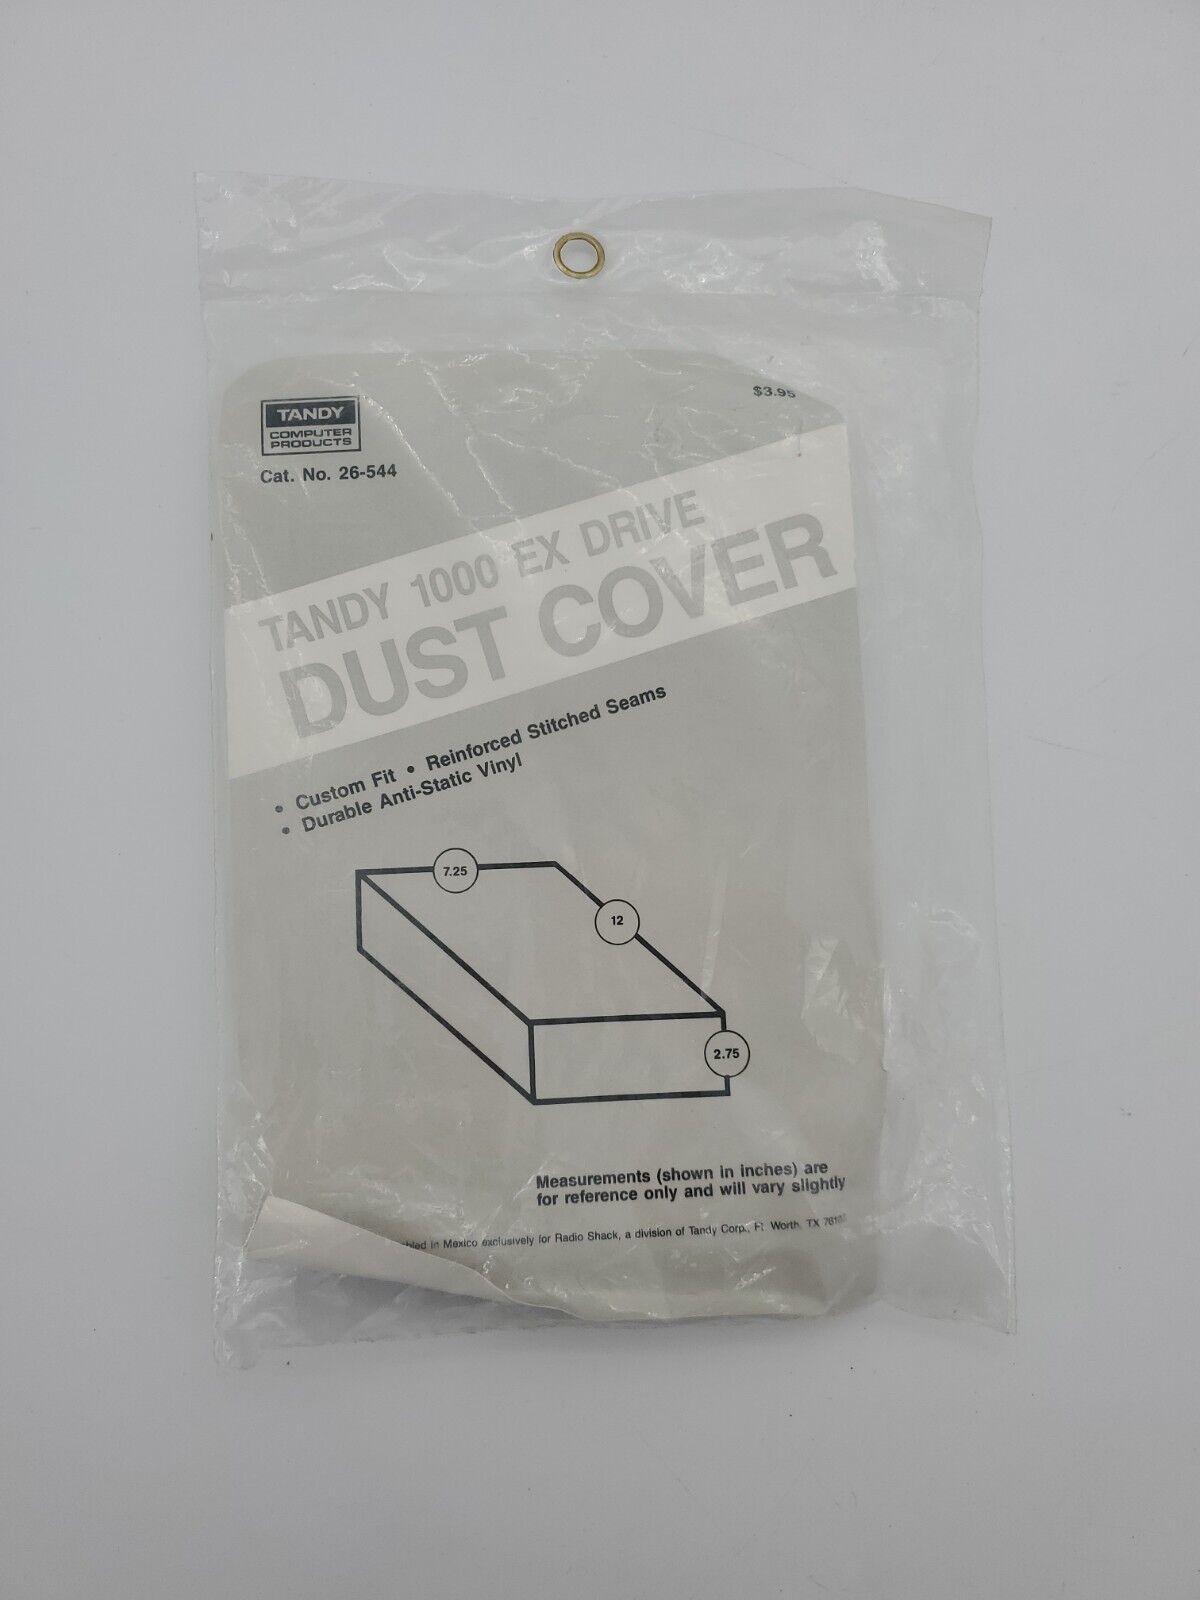 Vintage Tandy computer 1000 Ex Drive Dust Cover New Sealed  26-544